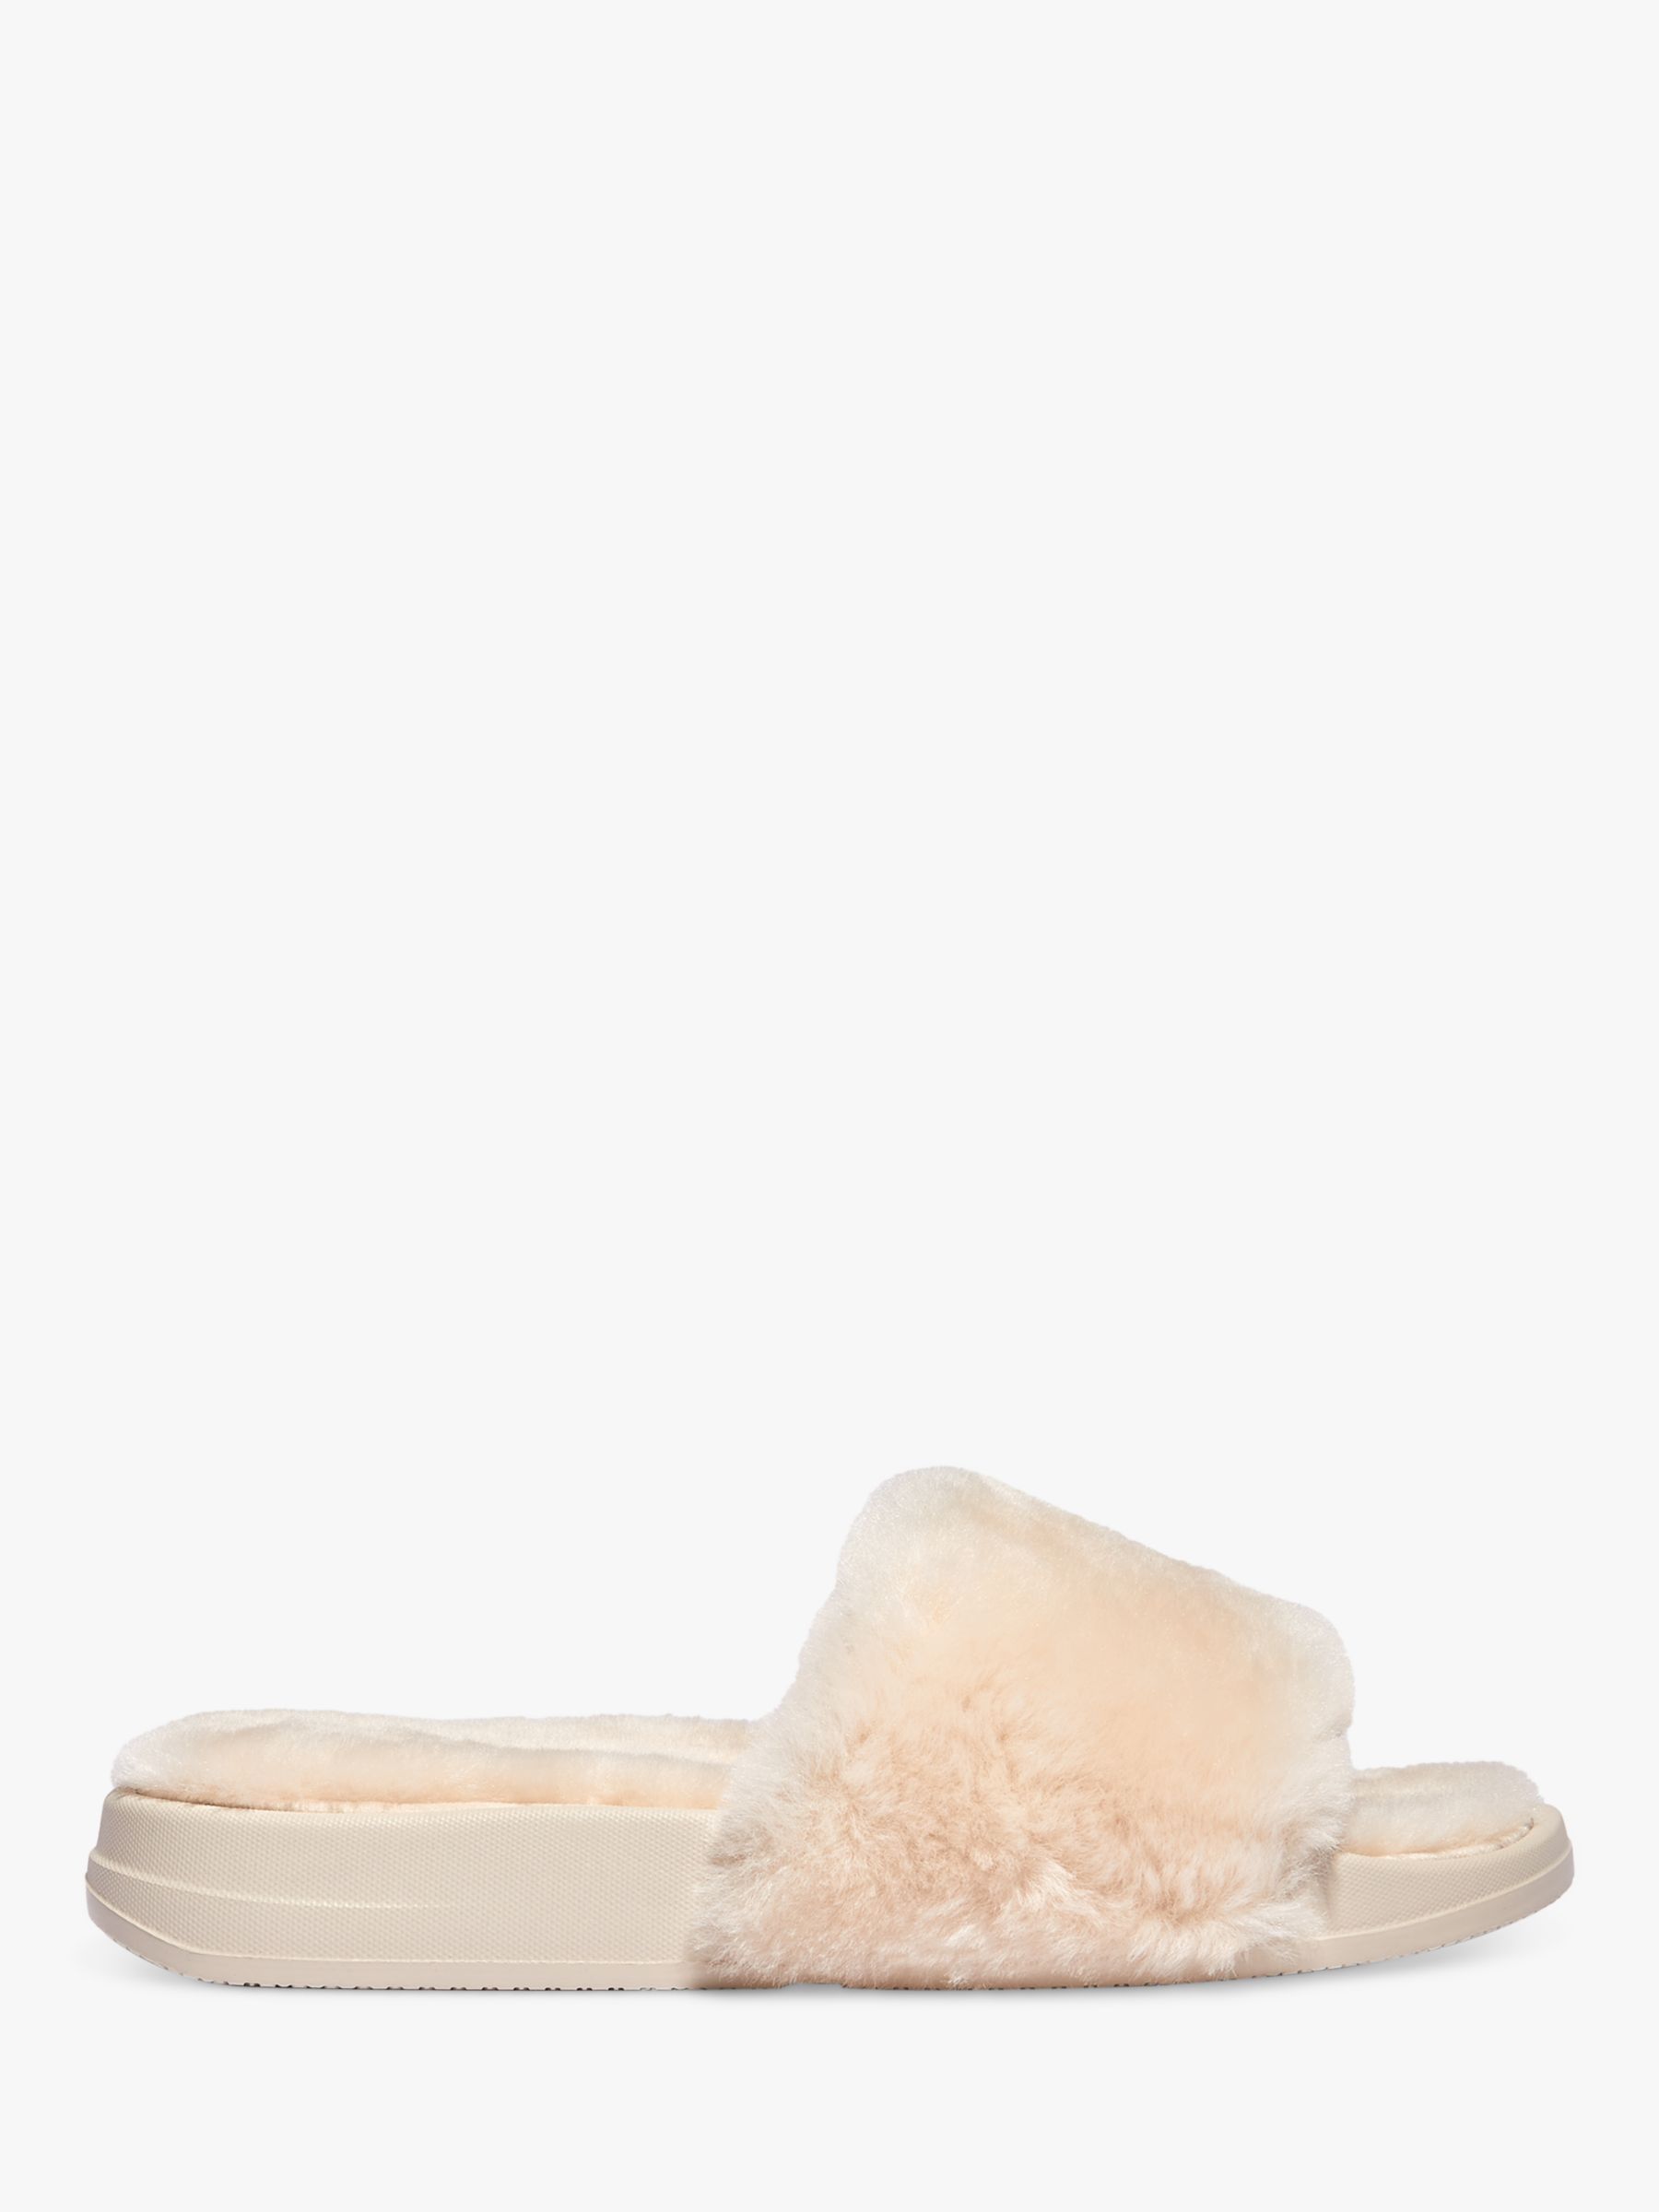 FitFlop IQushion Shearling Sliders, Ivory at John Lewis & Partners